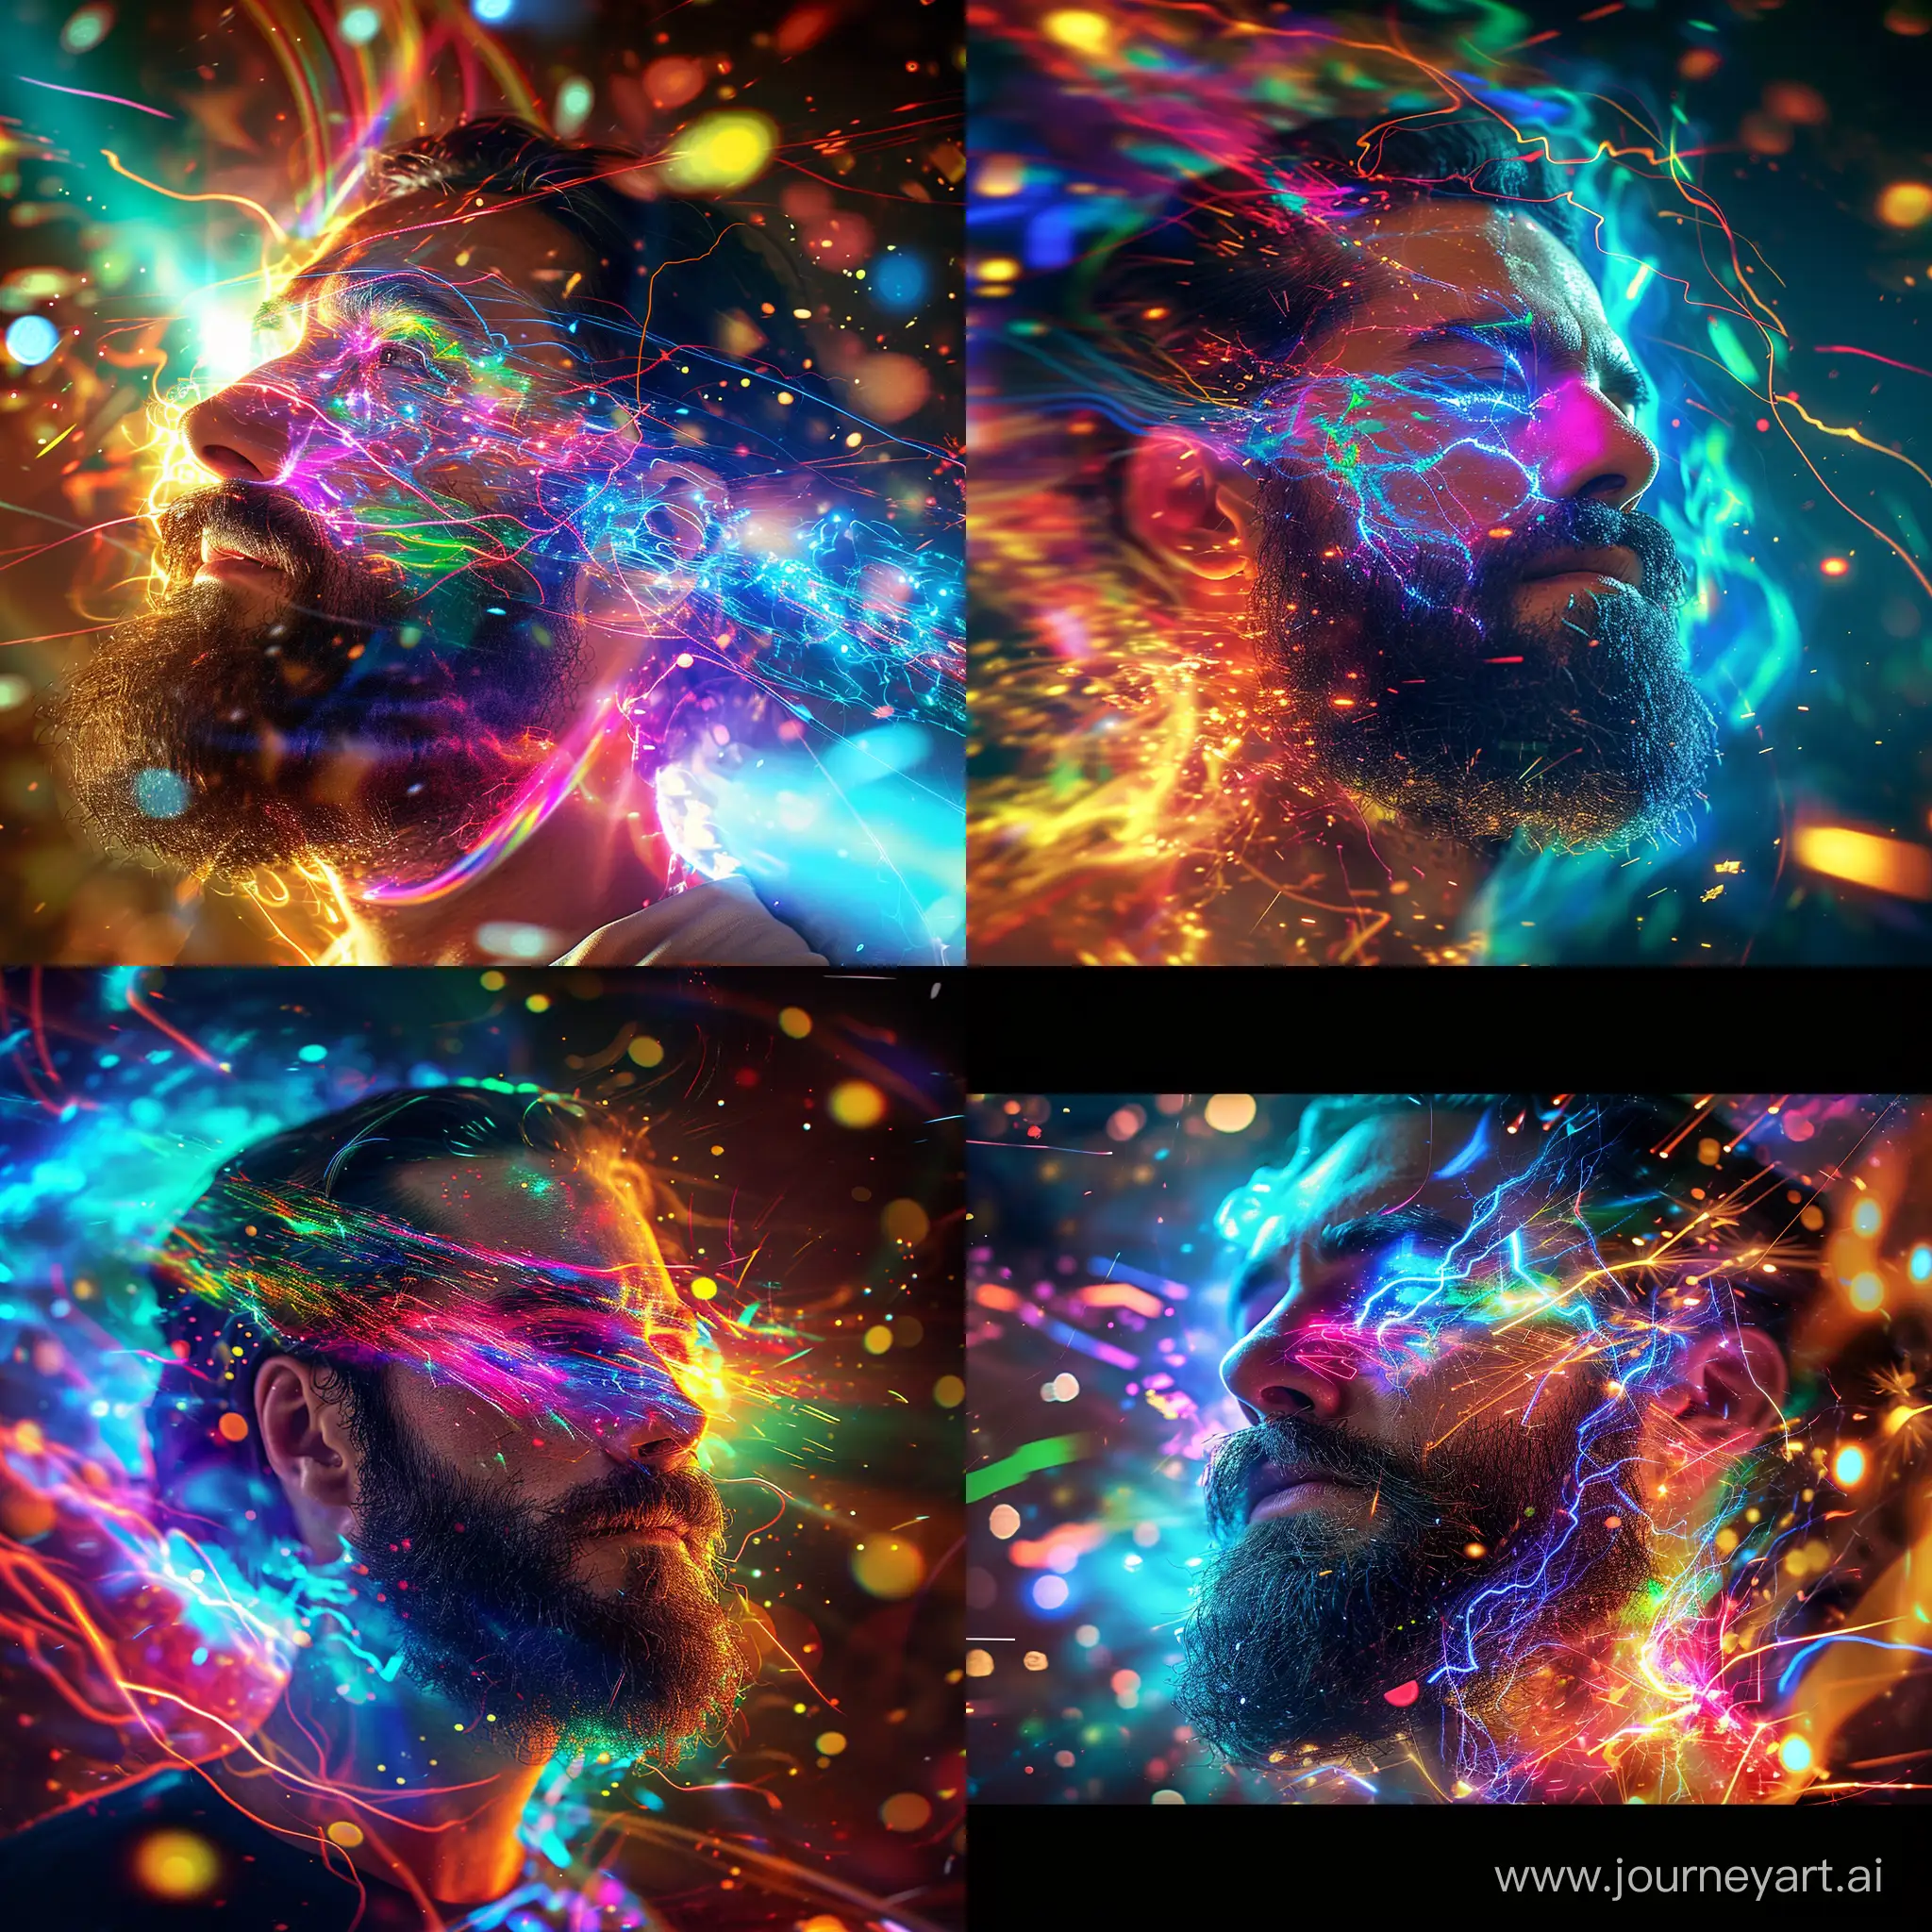 https://i.postimg.cc/h4byd3V2/1704970717767-4.png a bearded man with colorful lights and energy surrounding him, --v 6